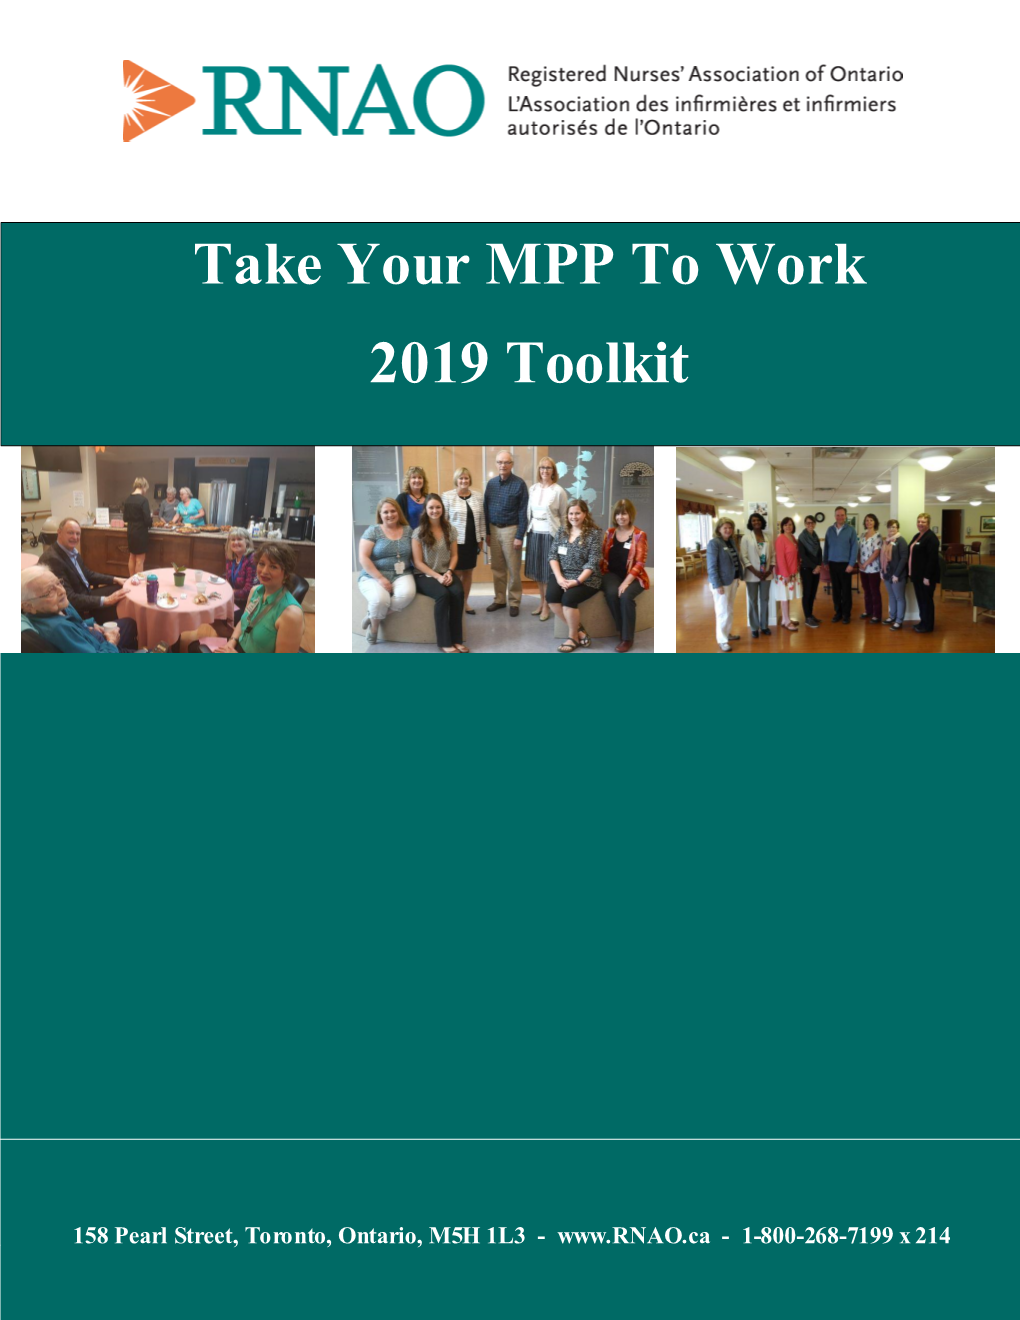 Take Your MPP to Work 2019 Toolkit Includes Templates and Sample Letters to Help Organize Your Visit